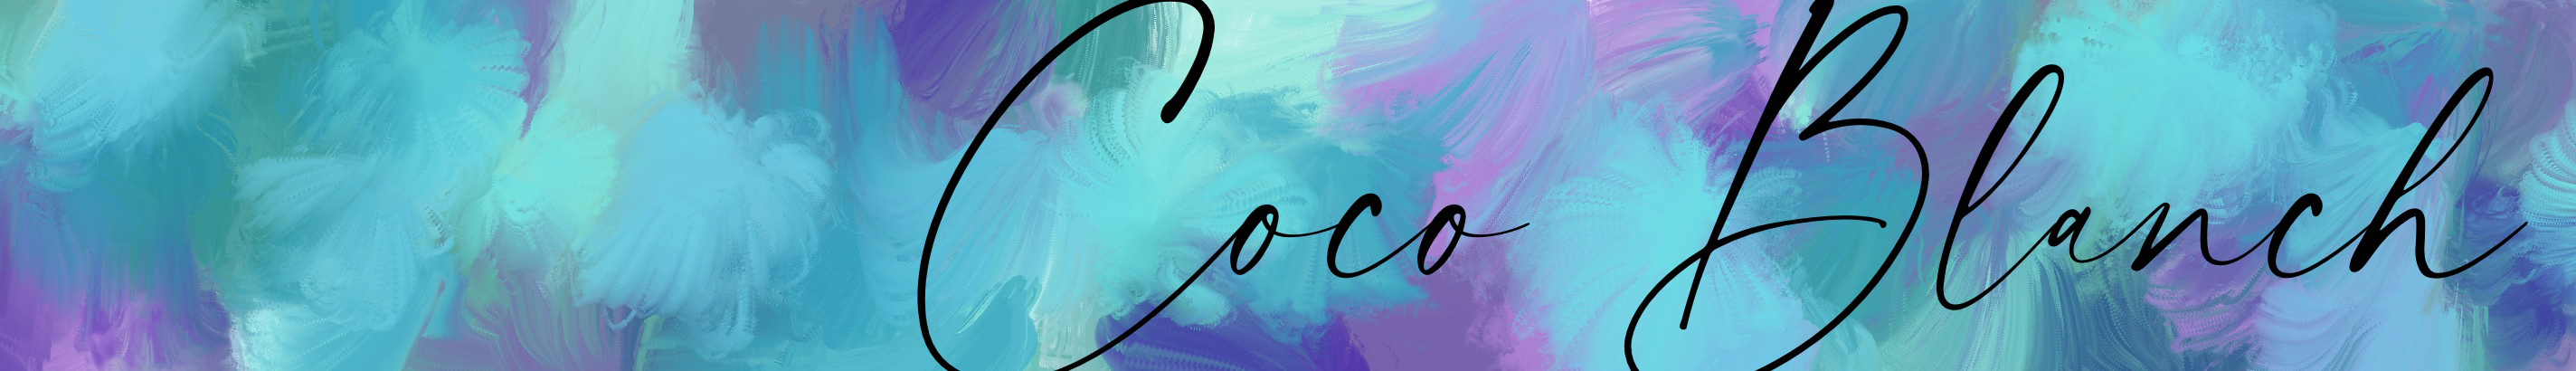 Coco Blanch's profile banner